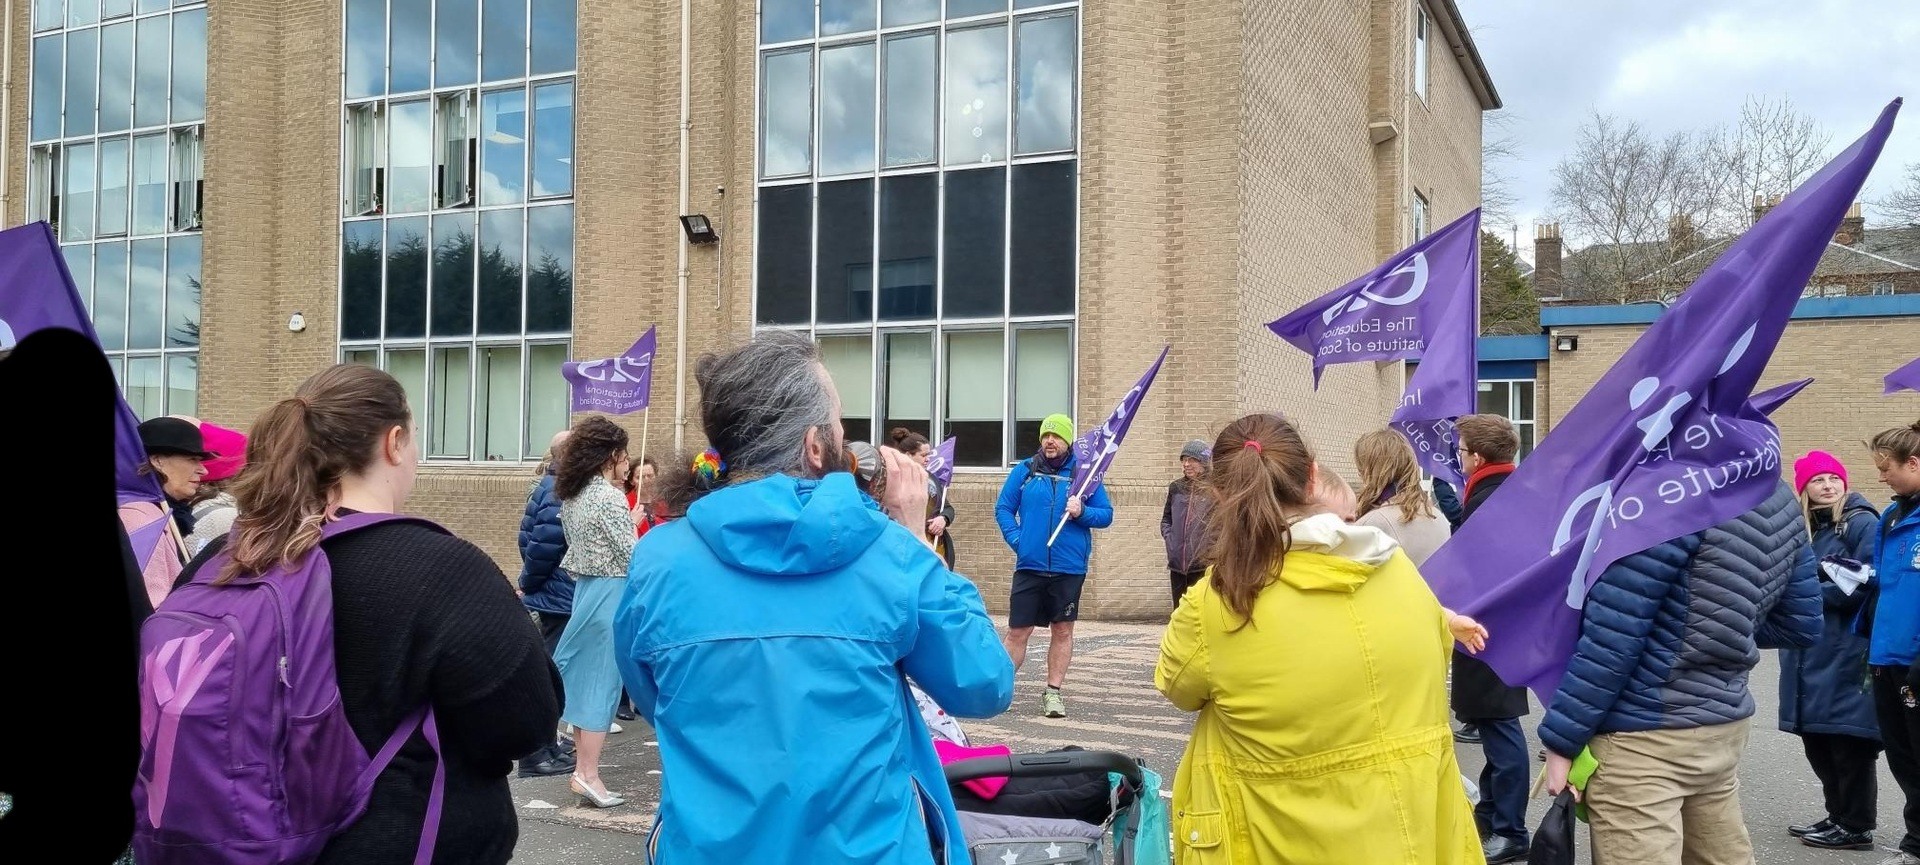 Teachers at Hutchesons’ Grammar held a car-park union meeting last week in opposition to the school’s plans to ‘fire and rehire’ teachers on new contracts with inferior pension provision.